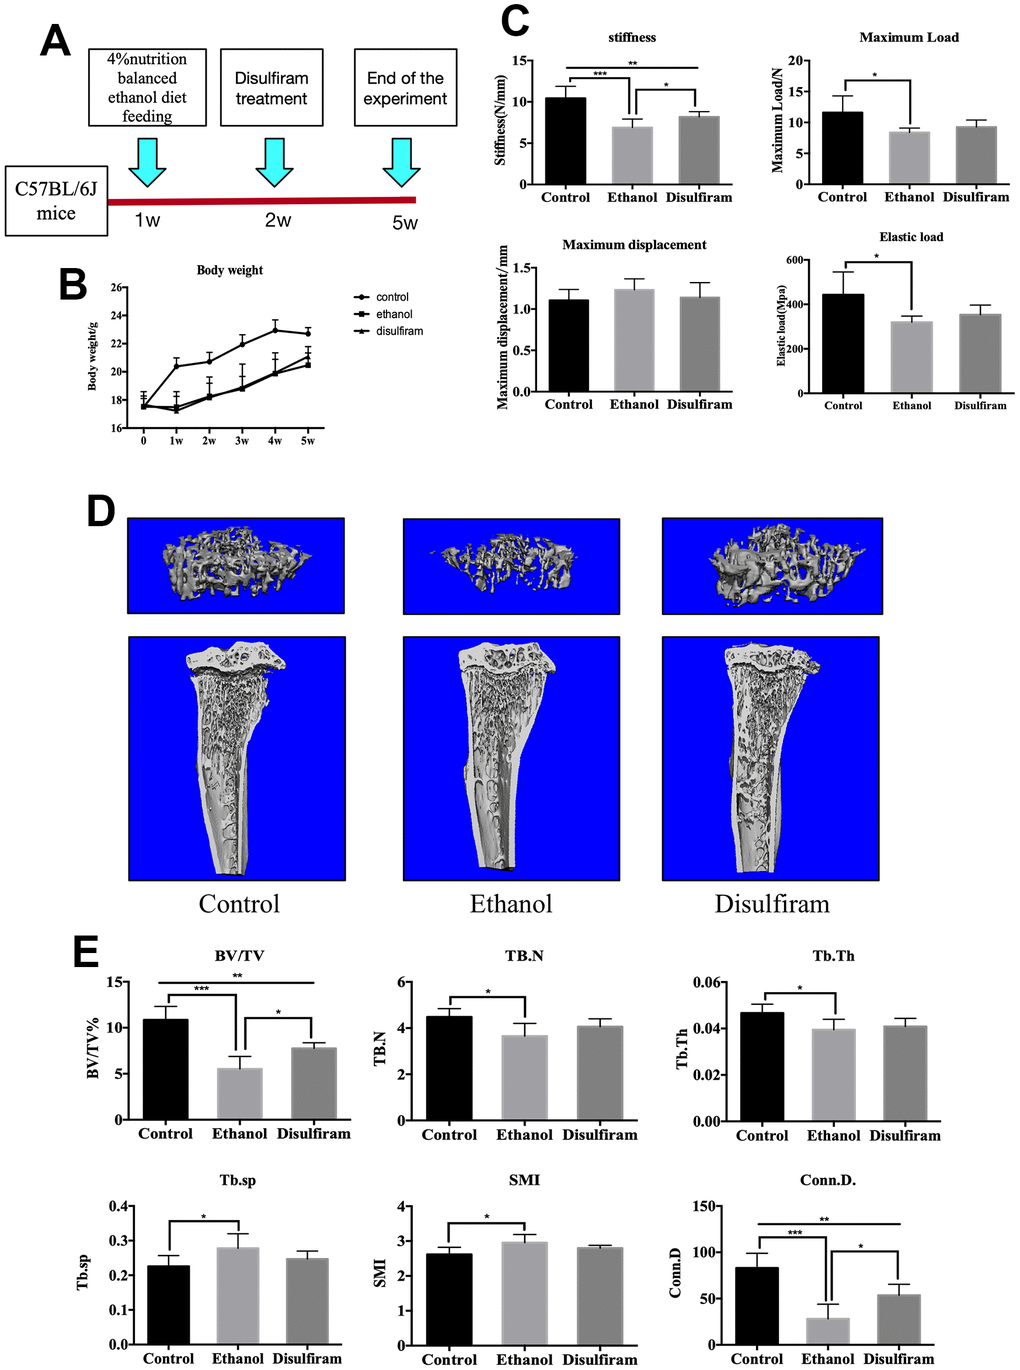 Disulfiram rescues alcohol-induced bone loss and reduction in bone mechanical strength in mice. (A) Schematic representation of the animal model. (B) Body weights of mice. (C) Mechanical properties (ultimate stiffness, maximum load, elastic load, and maximum displacement) of femurs. (D) Representative 3D micro-CT reconstruction images of mice in the control, ethanol, and disulfiram groups. (E) Quantitative analyses of morphometric parameters of the bone volume to tissue volume (BV/TV, %), trabecular number (Tb.N), trabecular thickness (Tb.Th), trabecular spacing (Tb.Sp), trabecular connectivity density (Conn.D), and the structure model index (SMI) of the regions of interest (n = 6). Bar graphs are presented as the mean ± SD. *p p p 